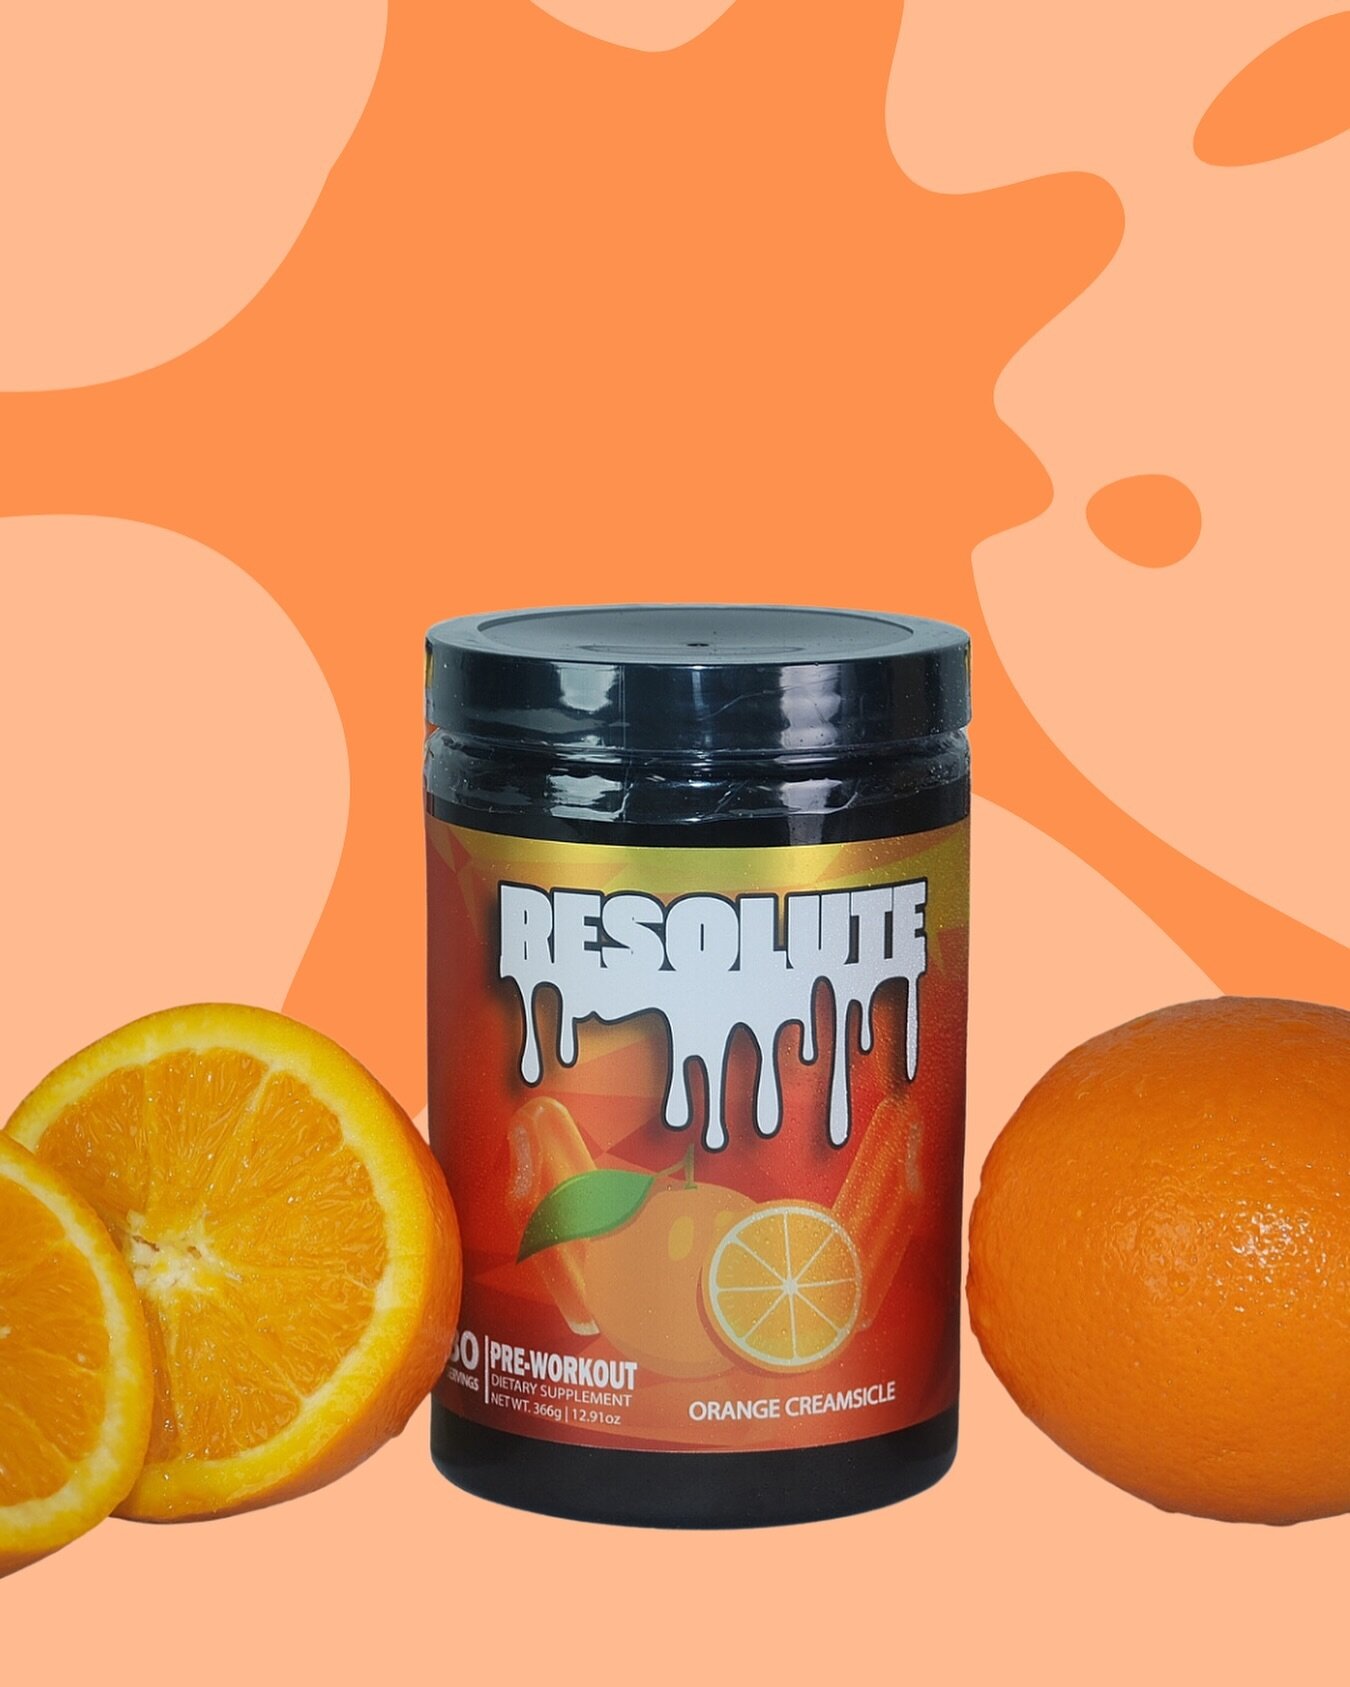 Introducing Orange Creamsicle 🍊🍦✨

A delicious blend designed to fuel your workouts with a burst of energy and focus. Crafted with the refreshing taste of oranges combined with creamy vanilla, each scoop delivers performance-enhancing ingredients t